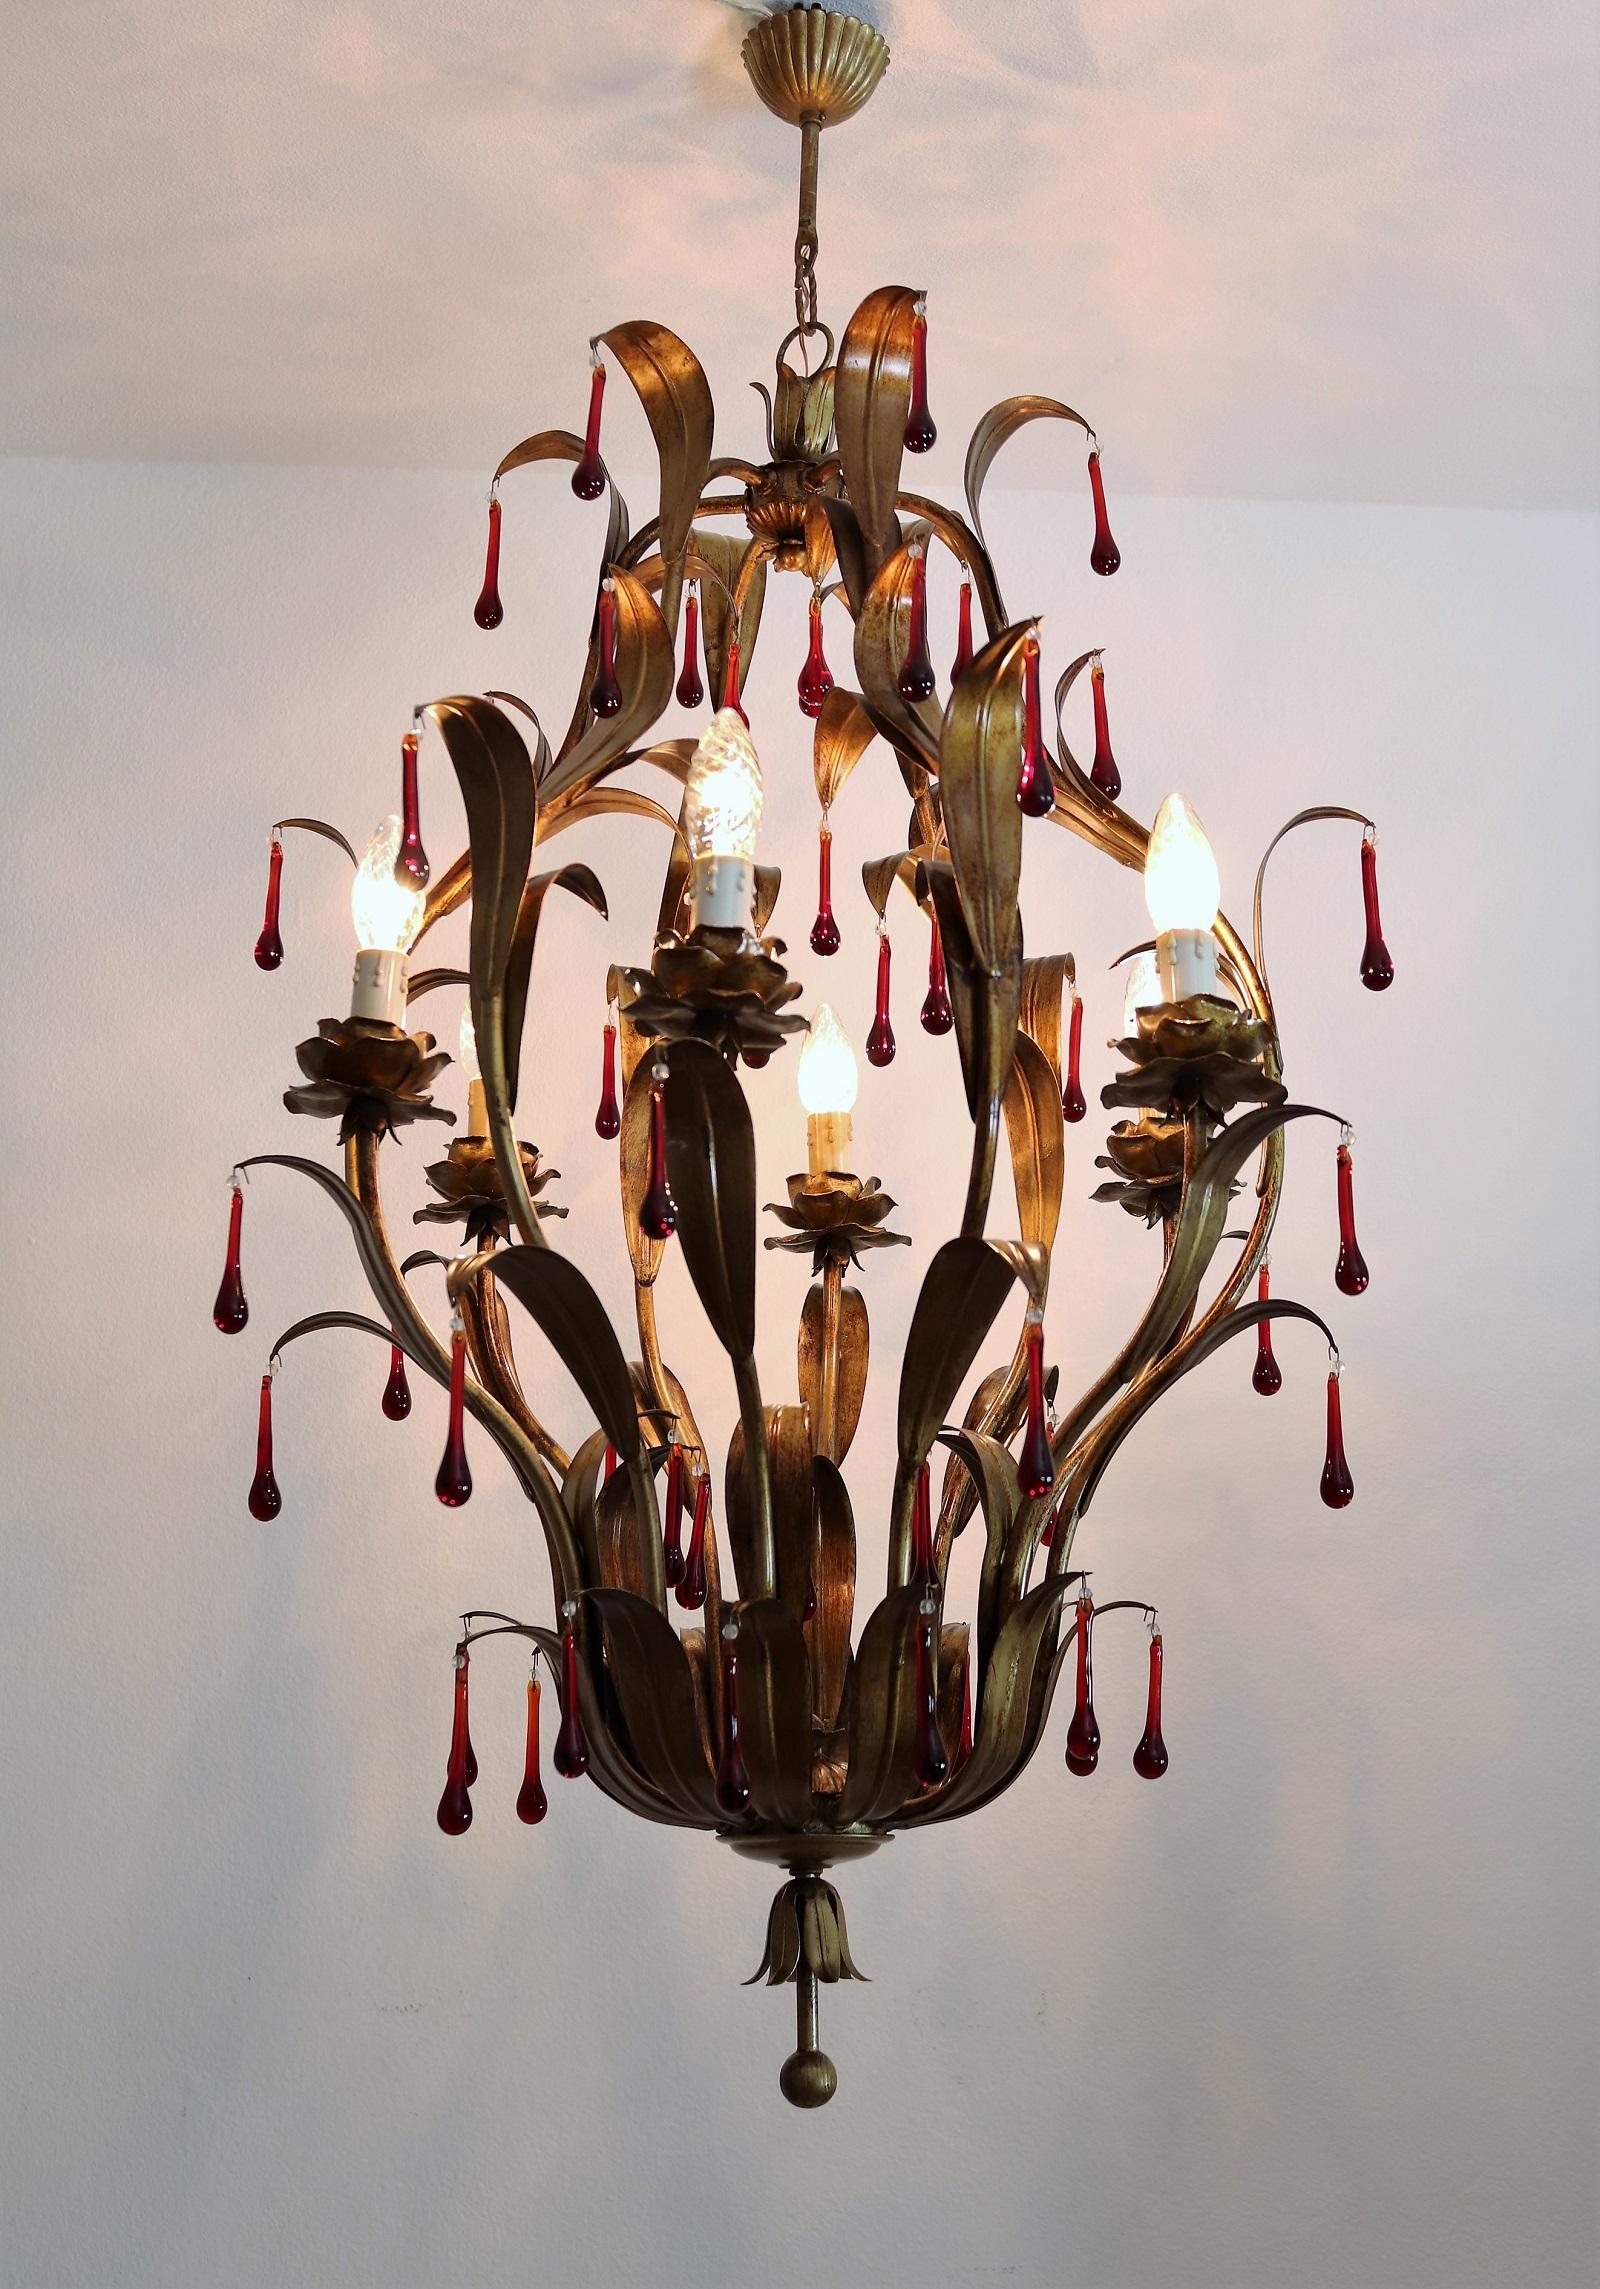 Mid-Century Modern Italian Midcentury Gilt Florentine Chandelier with Red Murano Glass Drops, 1970s For Sale